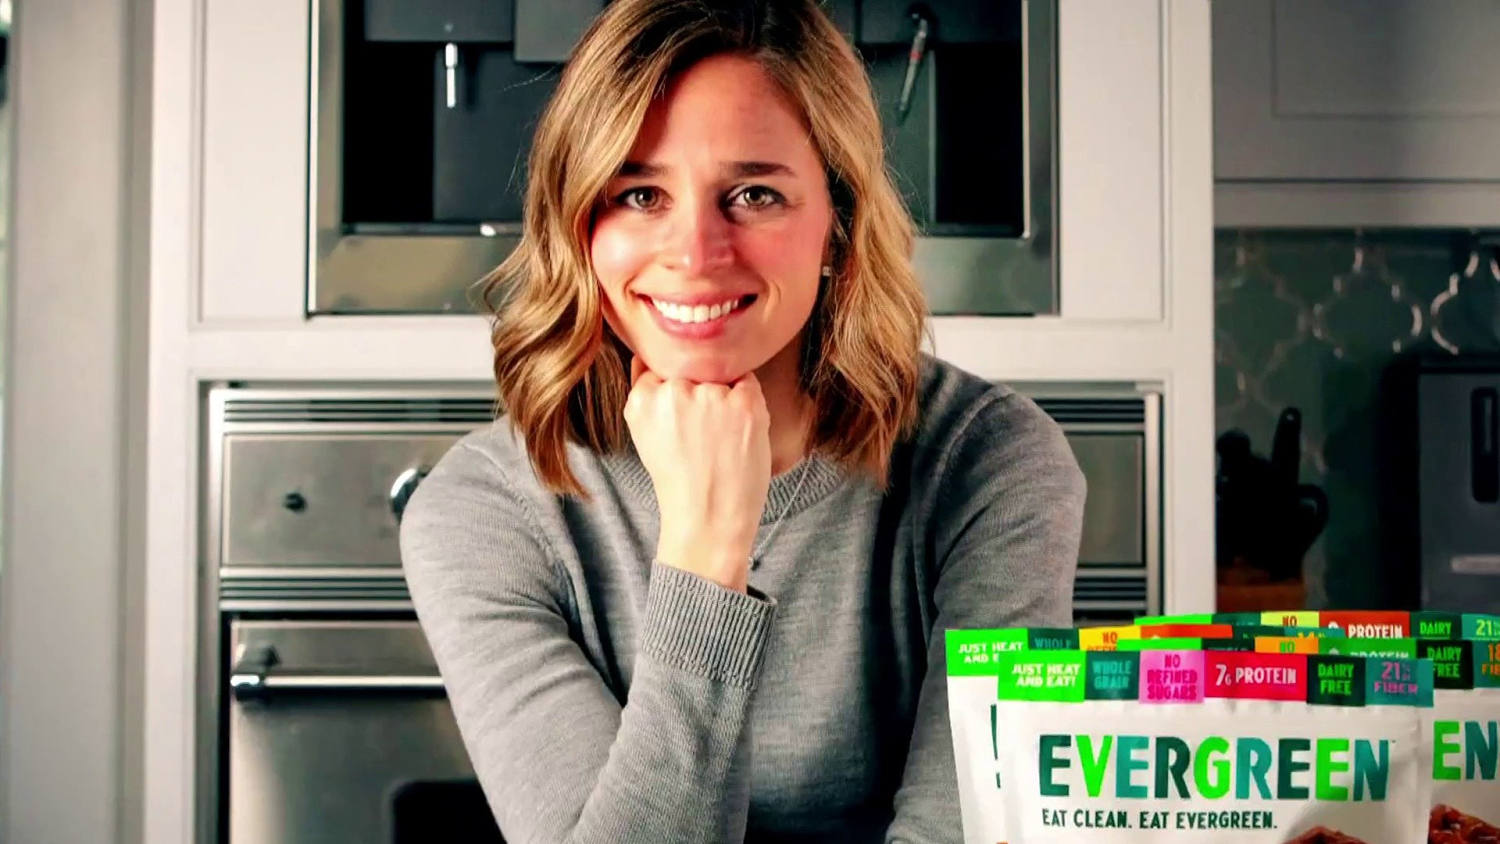 Harvard-educated lawyer Emily Groden builds Evergreen healthy waffle brand  from scratch - ABC7 Chicago